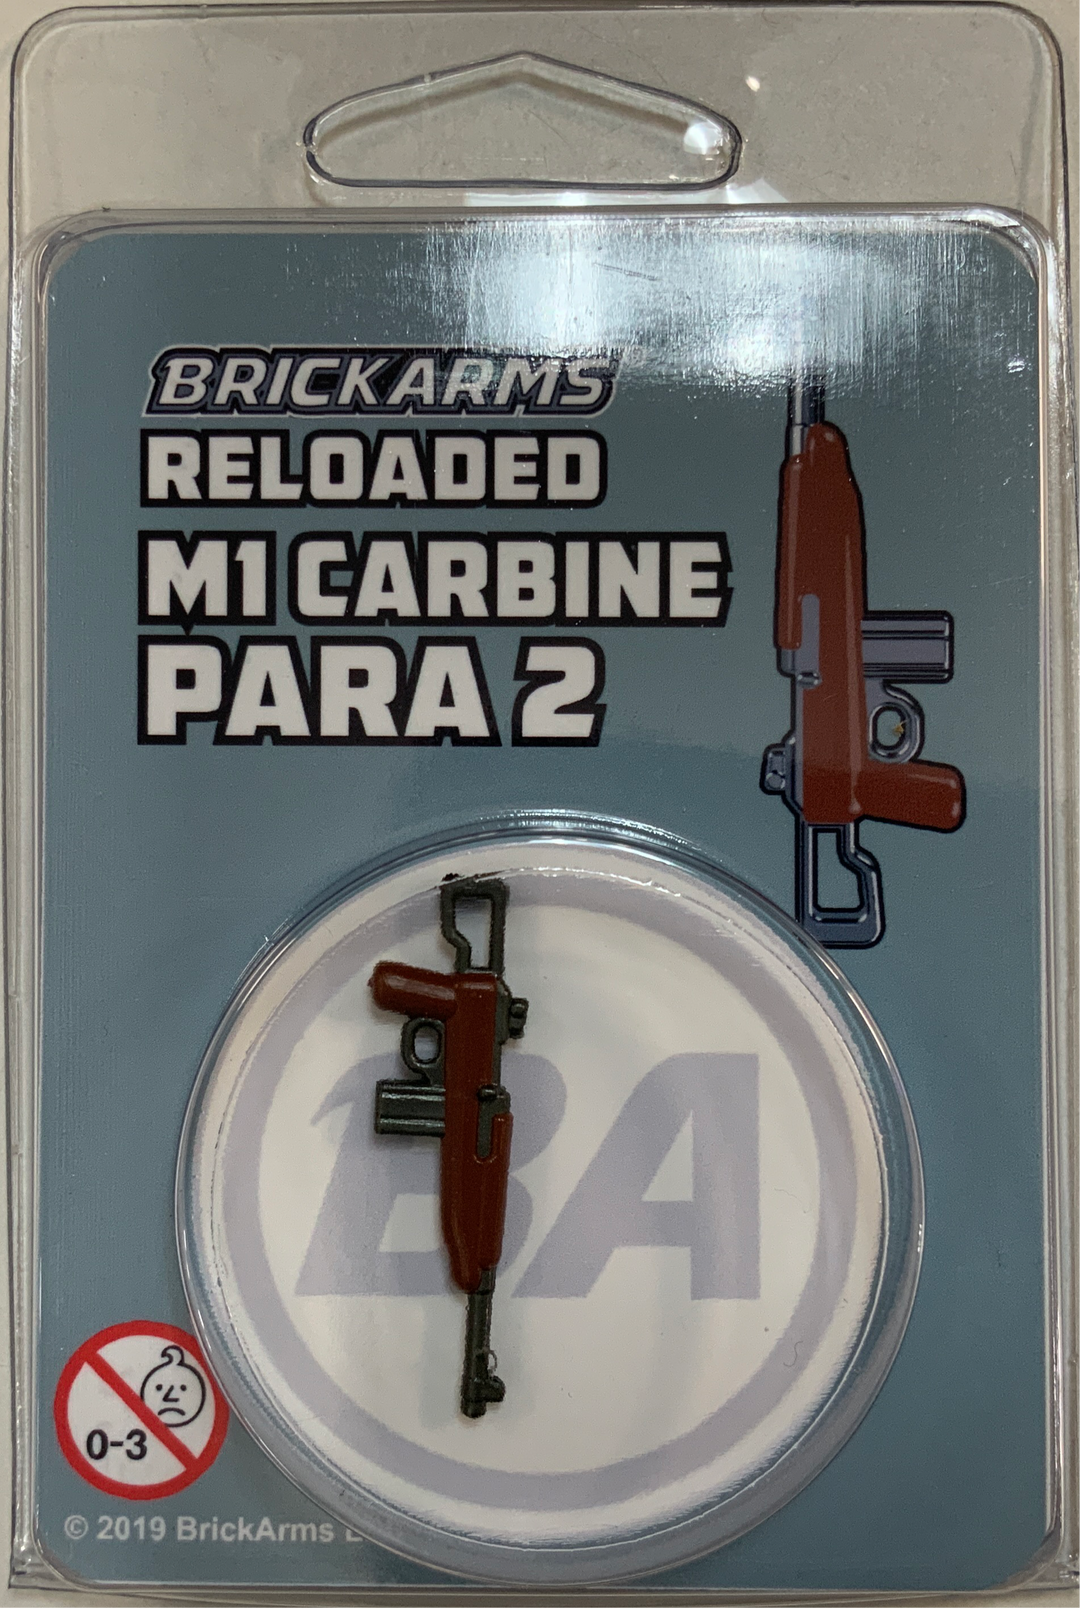 BRICKARMS M1 CARBINE PARA 2 RELOADED & Overmolded